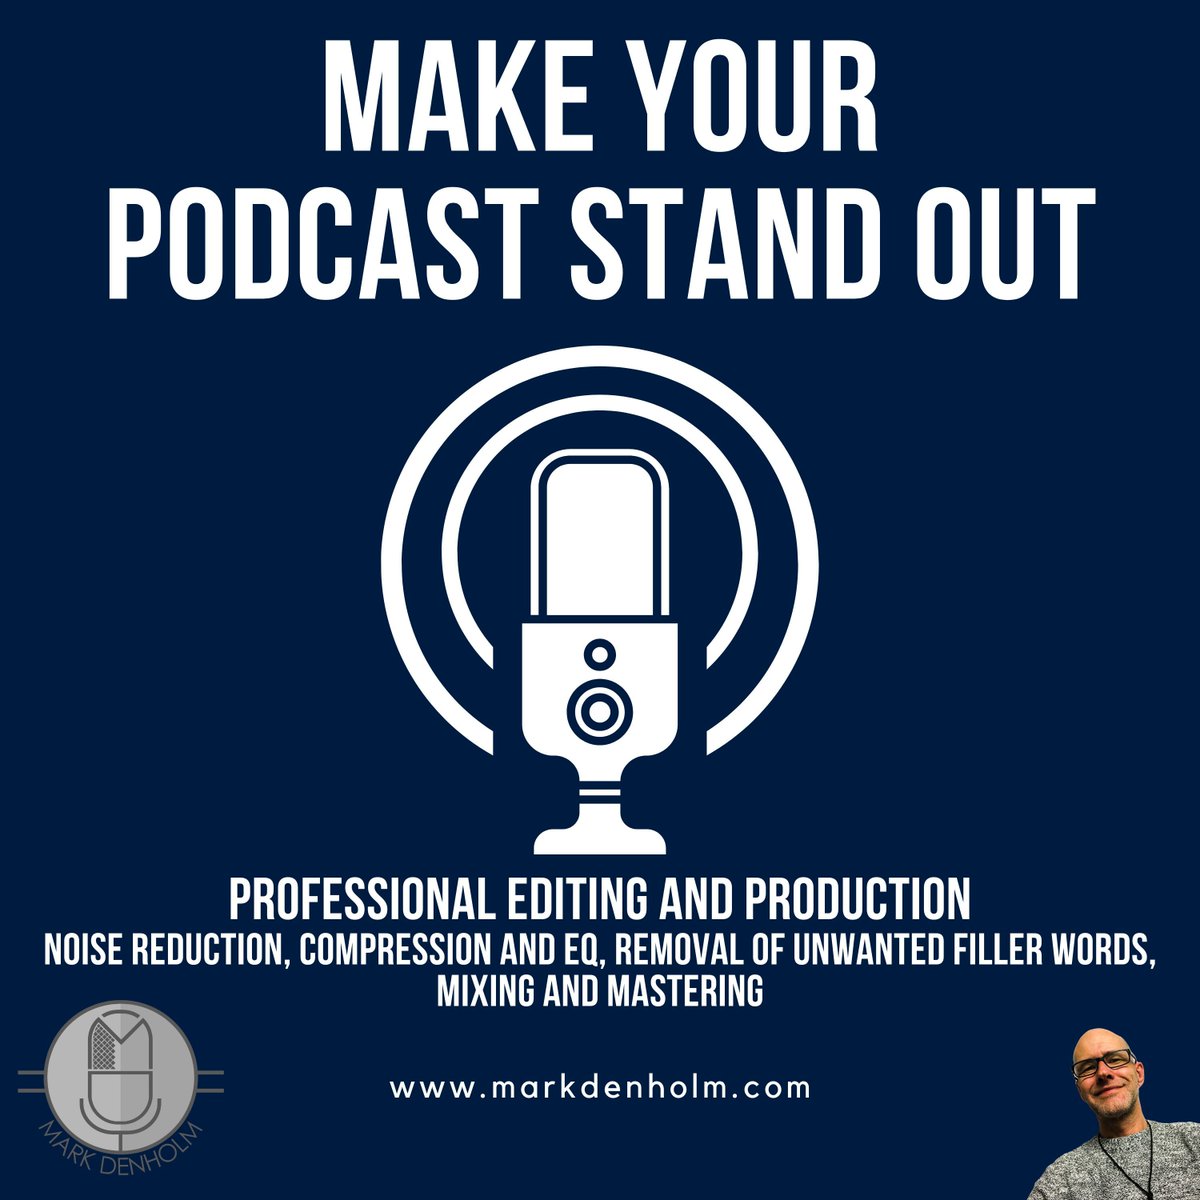 Want your #Podcast to sound great? Let me edit and produce it for you!  Professional and affordable and discounts for multiple episodes (5+). #podcasting #podcaststudio #podcastediting #podcastproduction markdenholm.com/podcasting/